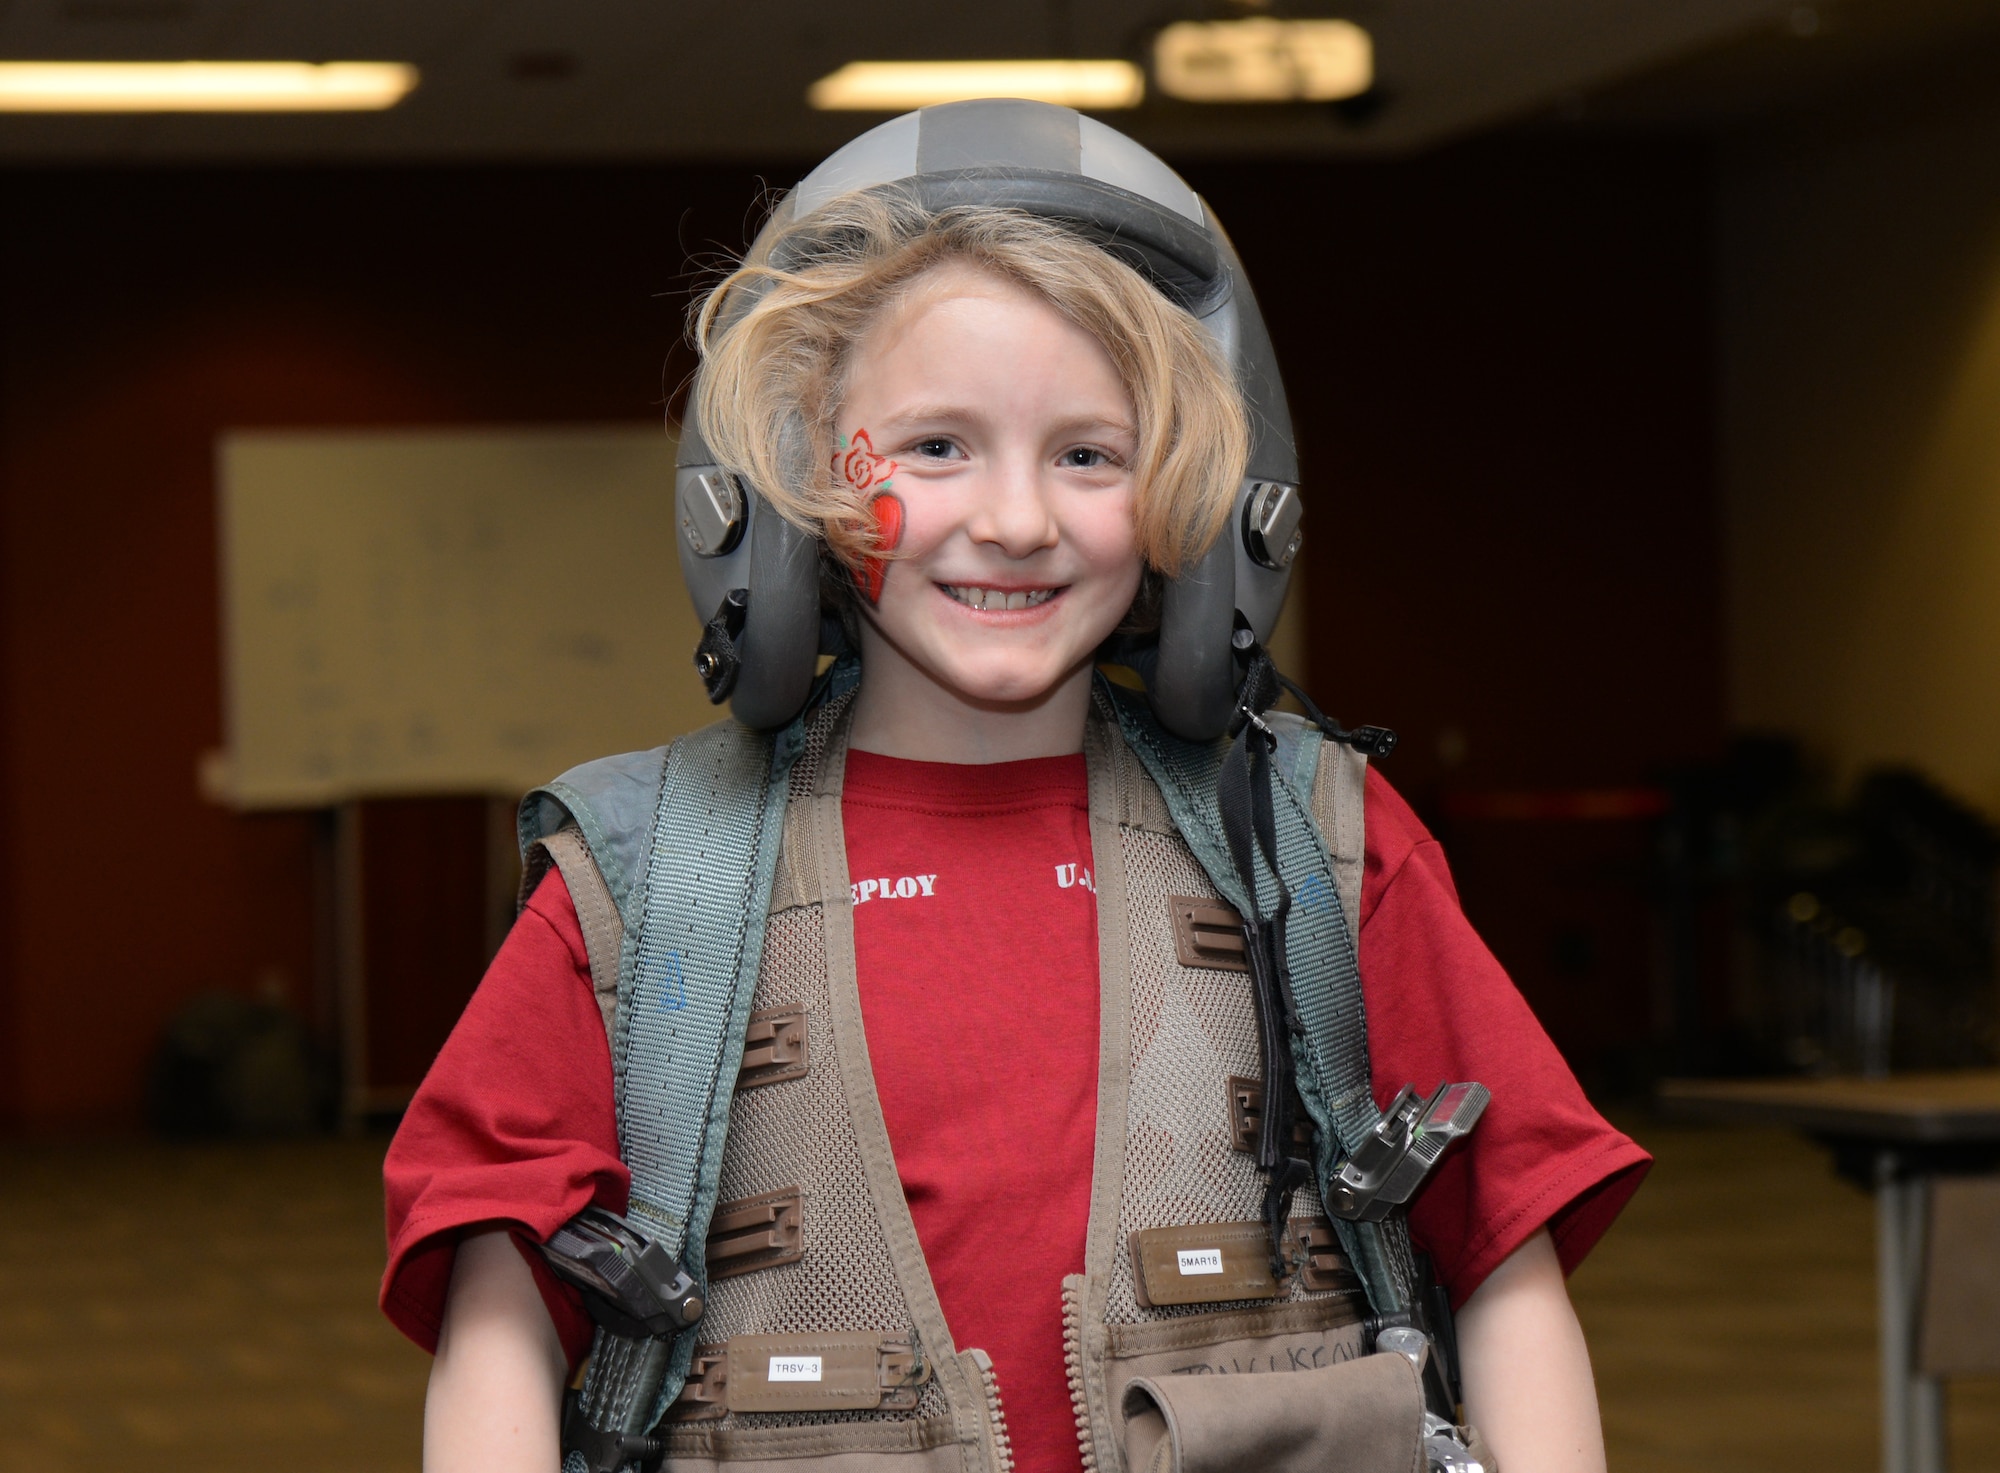 A child wears flight equipment during a kids deployment line at Ellsworth Air Force Base, S.D., April 7, 2018. The Month of the Military Child is celebrated in April to bring awareness to the important role the children of service members play in the armed forces community. (U.S. Air Force photo by Airman 1st Class Nicolas Z. Erwin)